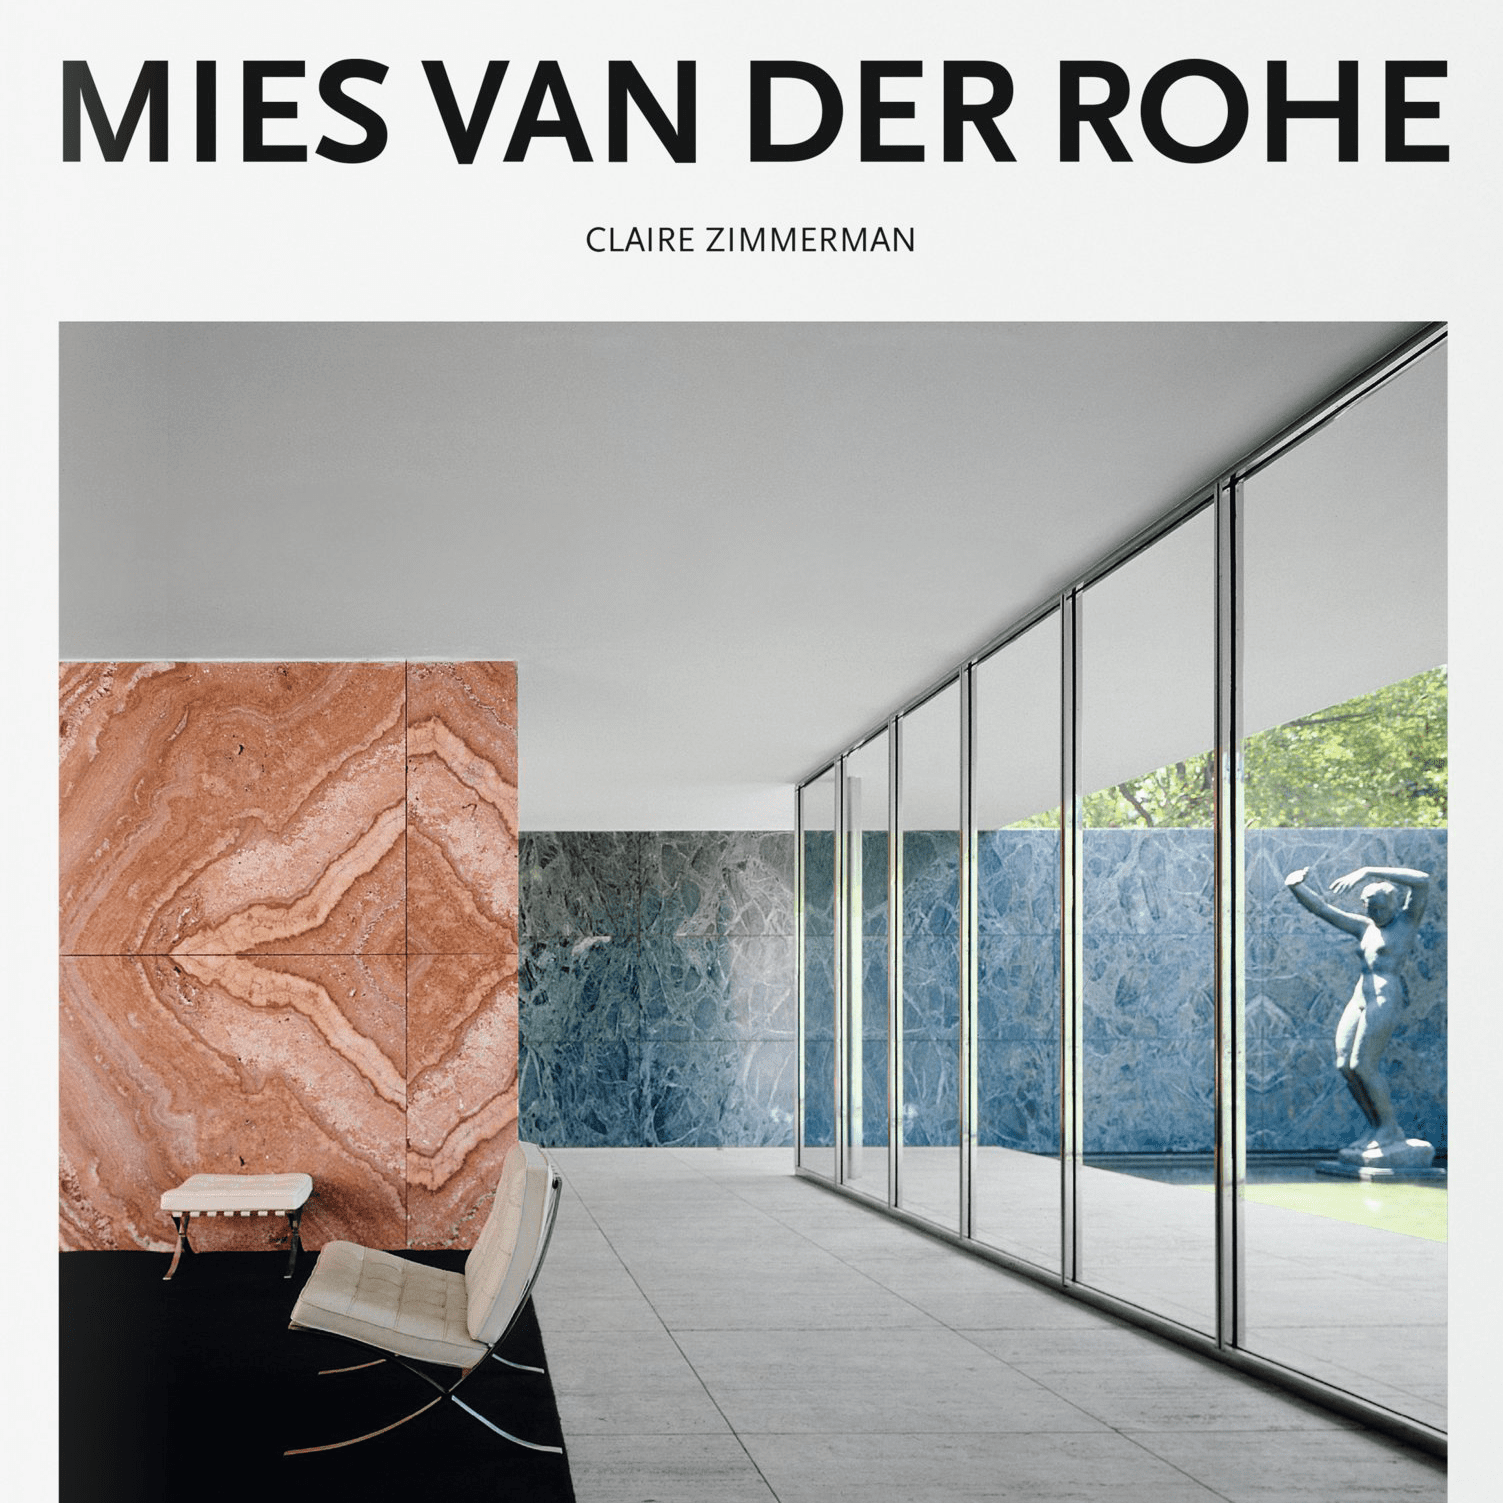 Picture of Mies van der Rohe's projects from 1906 to 1967